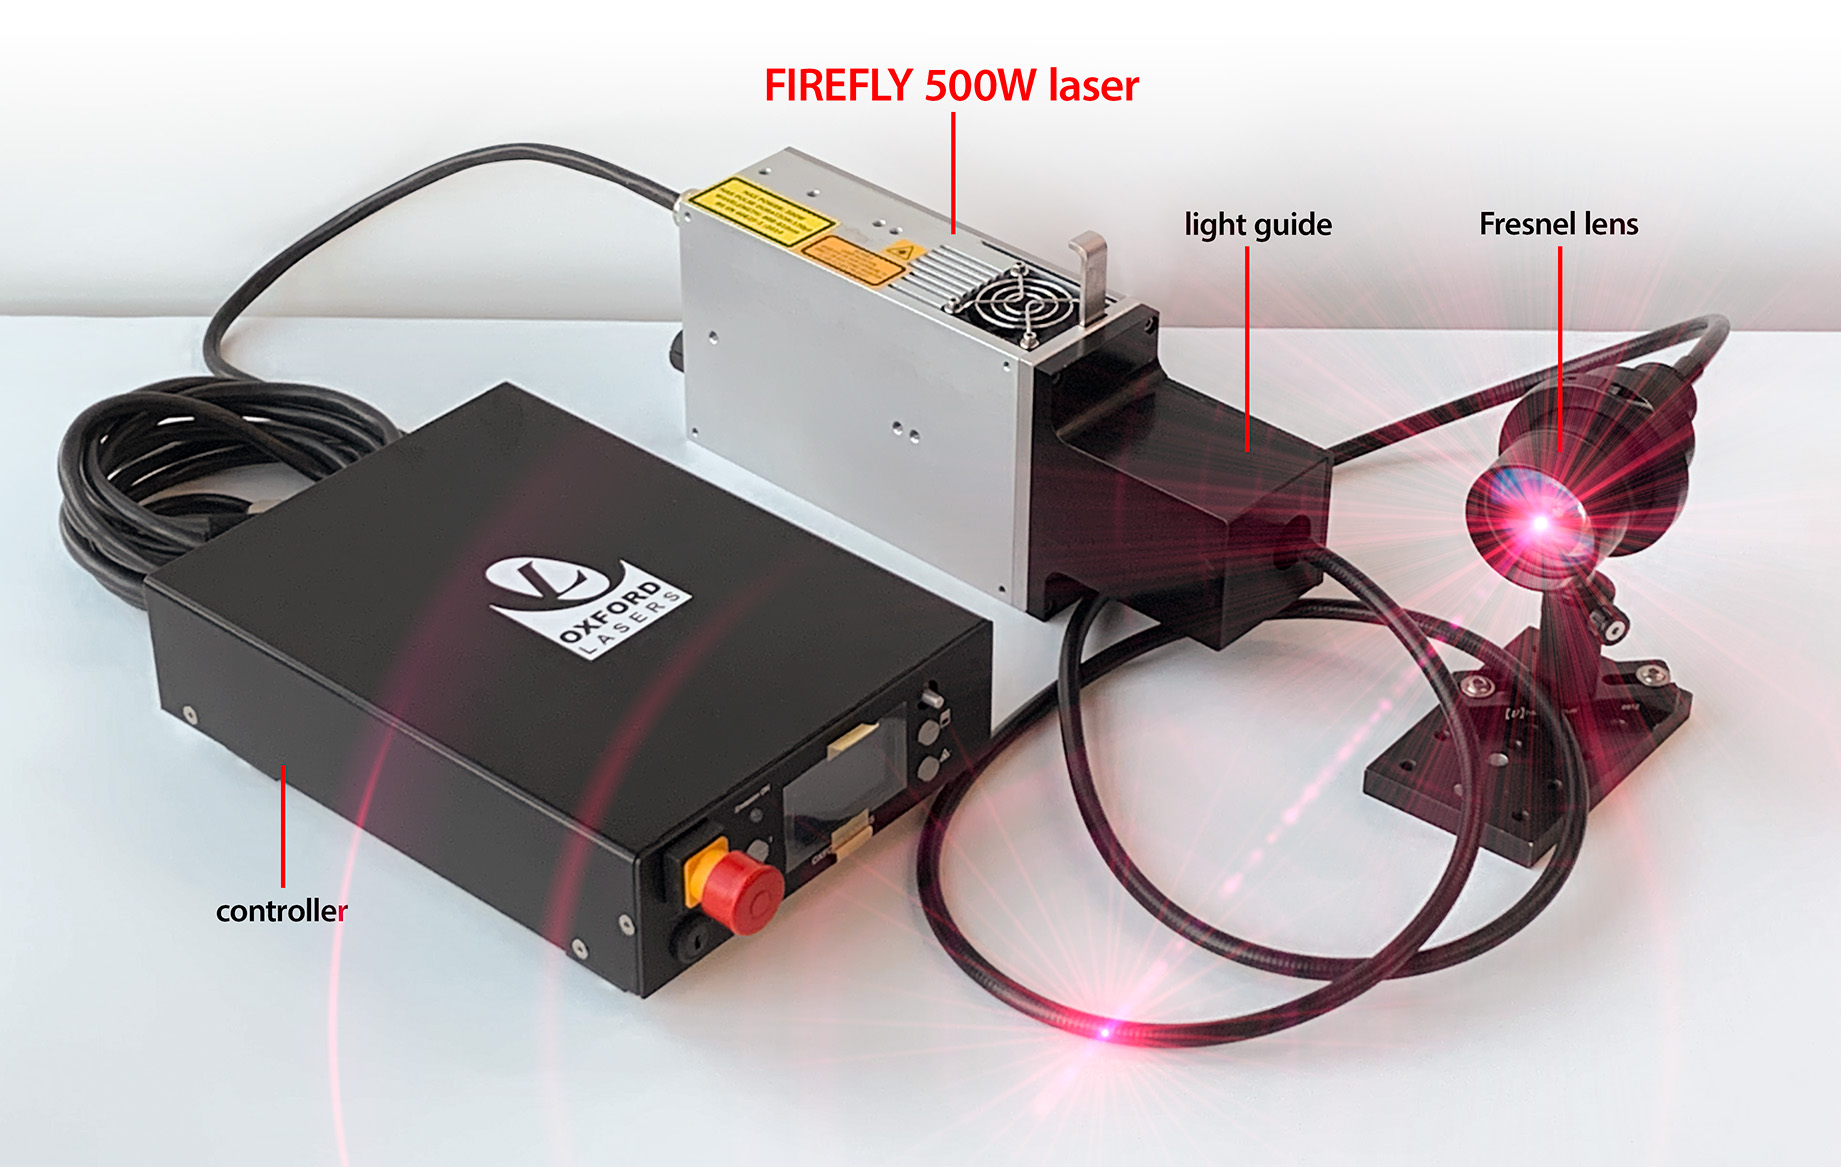 Oxford Lasers FIREFLY 500W laser with controller, light guide and Fresnel lens by Hadland Imaging.